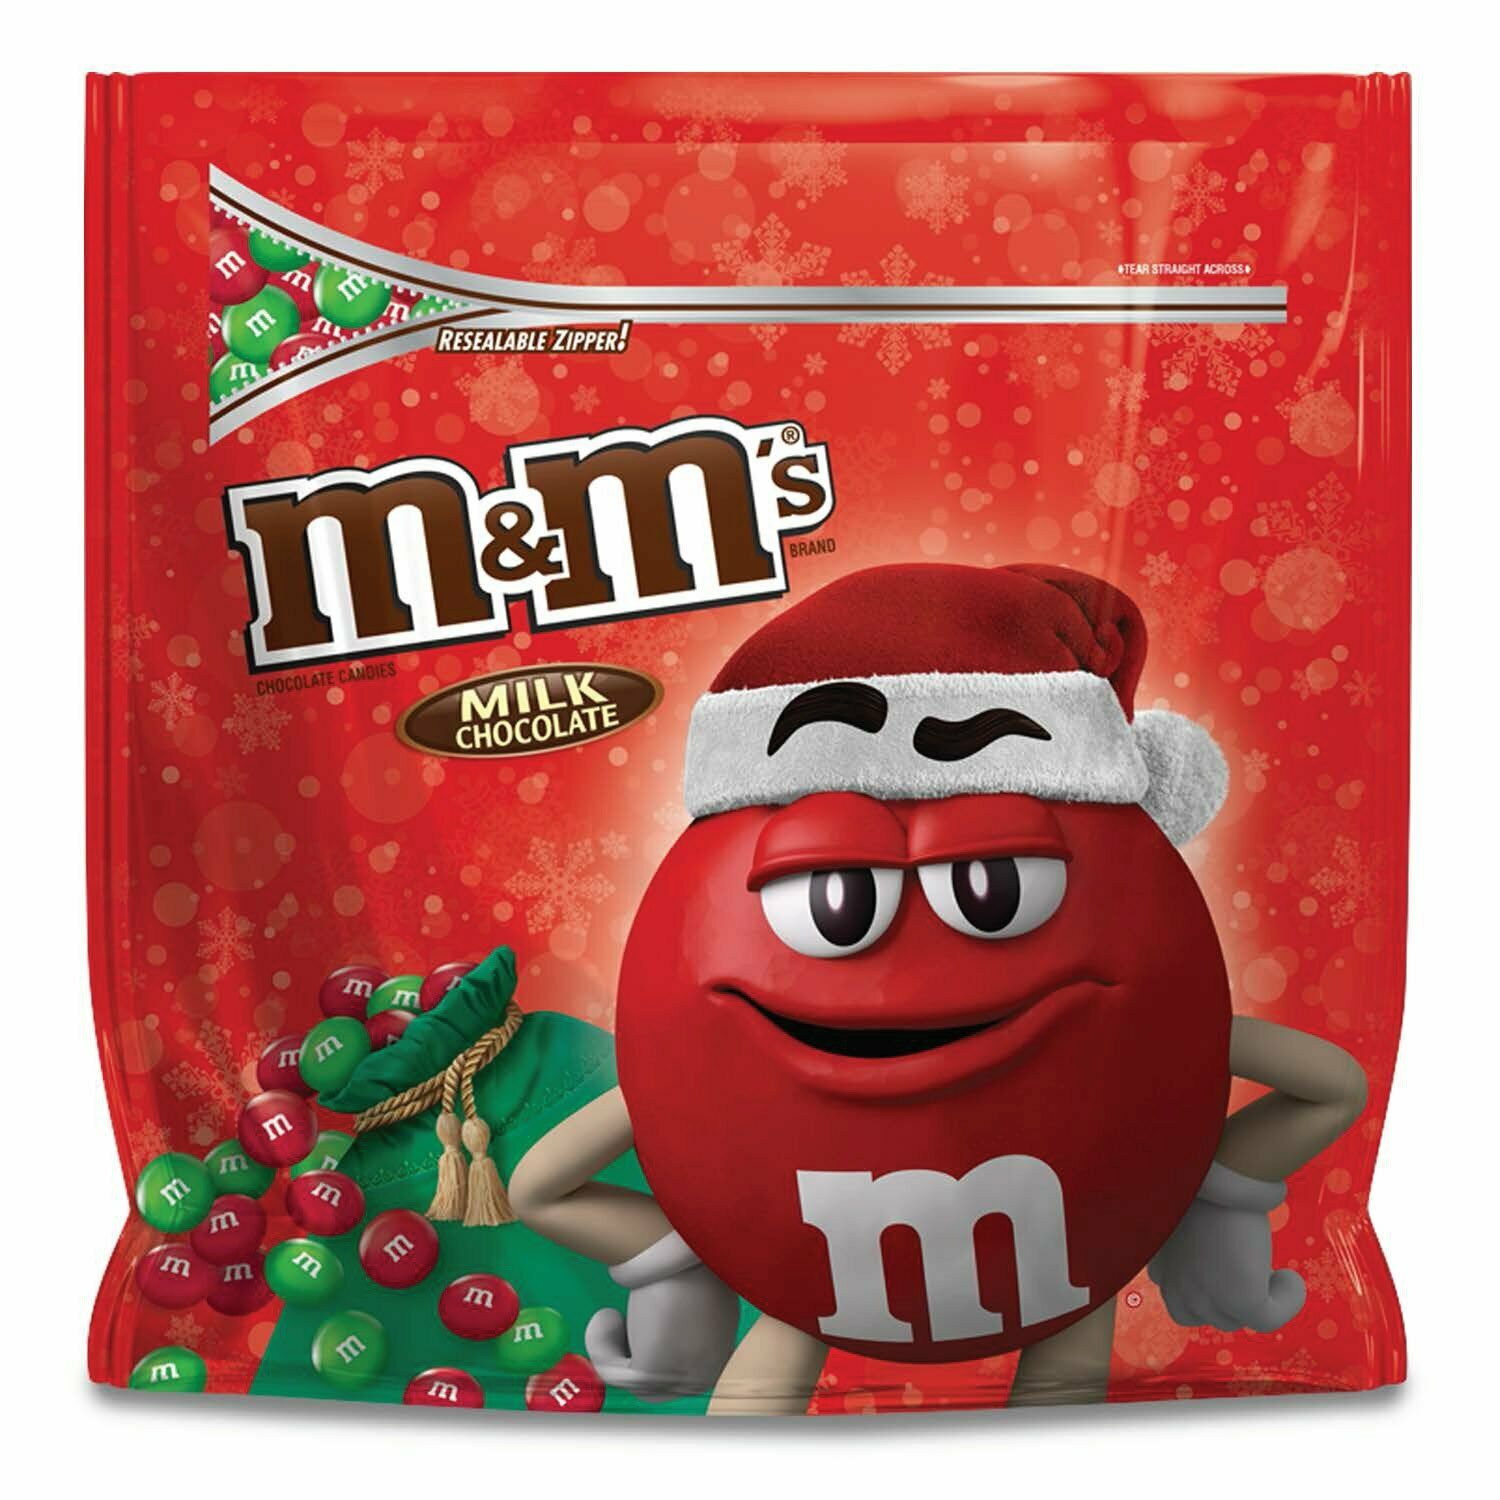 M&M's Holiday Milk Chocolate Candy, Party Size, 38oz – Five and